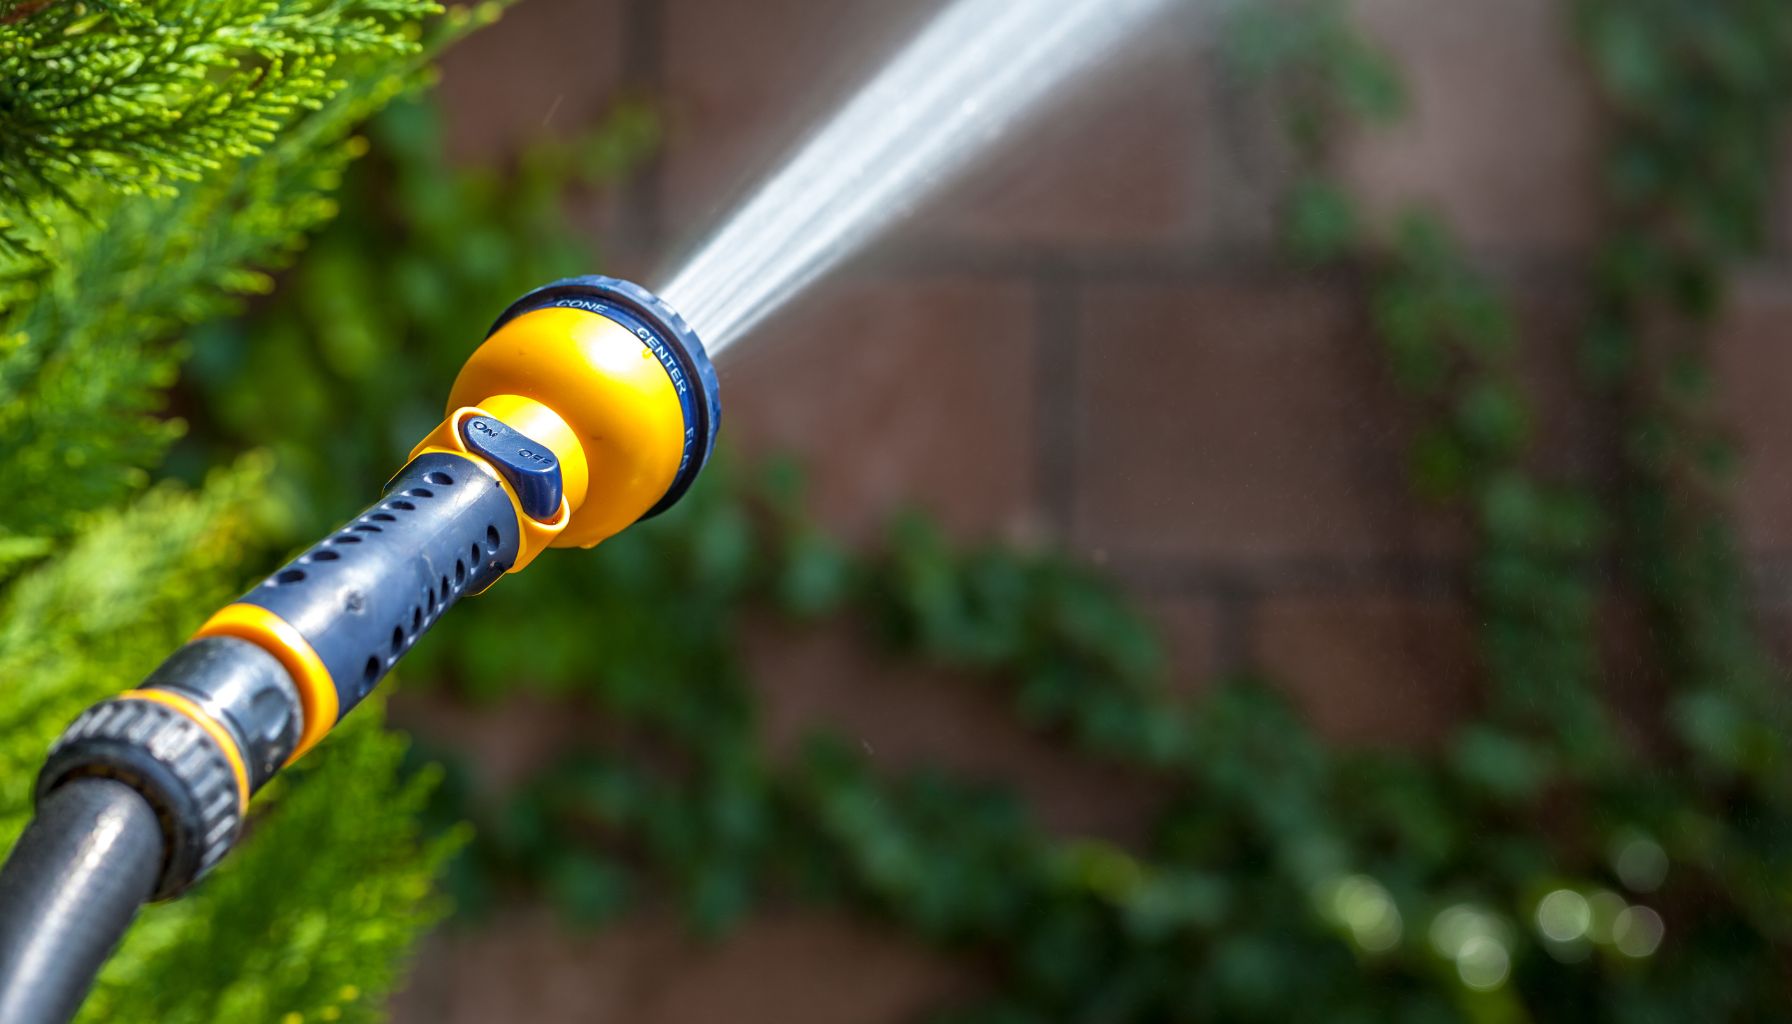 Choosing the Best Hose Nozzle for Your Garden